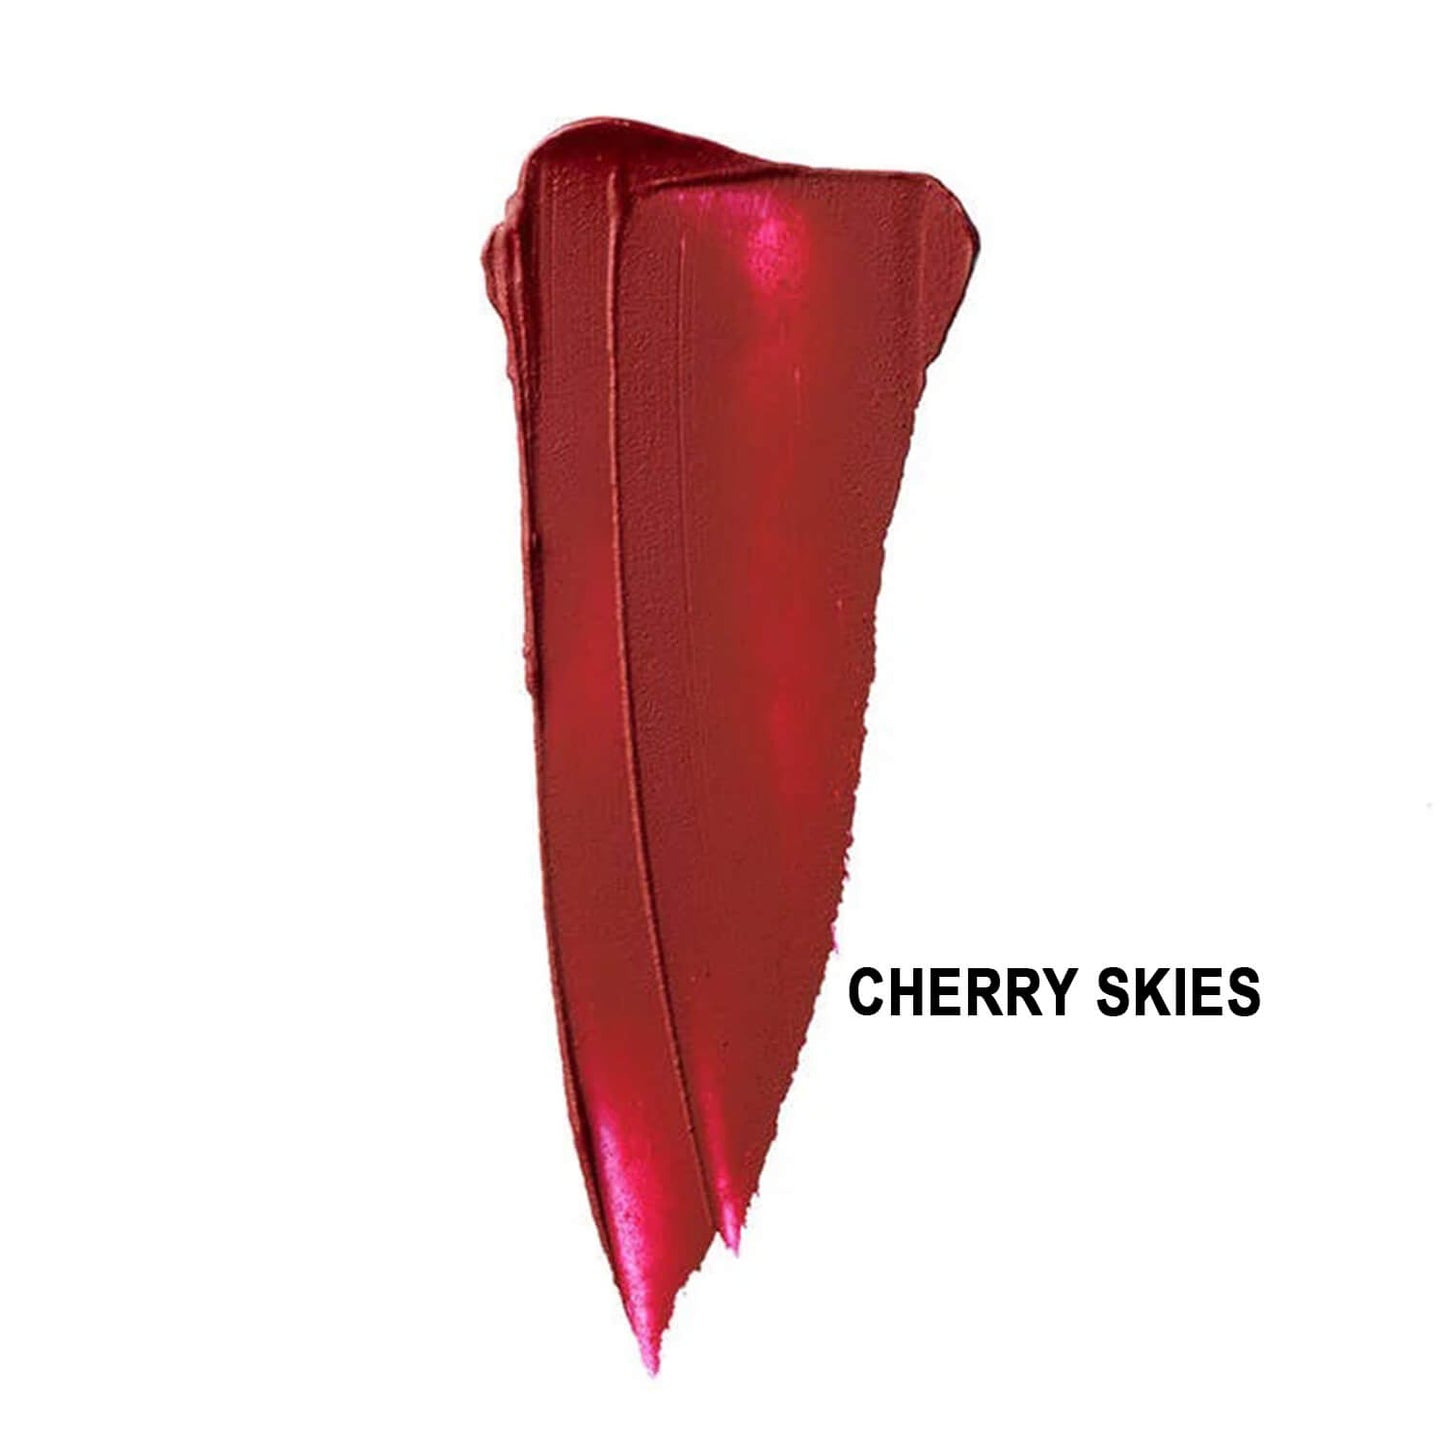 NYX Liquid Suede Cream Lipstick swatch of cherry skies available at Heygirl.pk for delivery in Pakistan